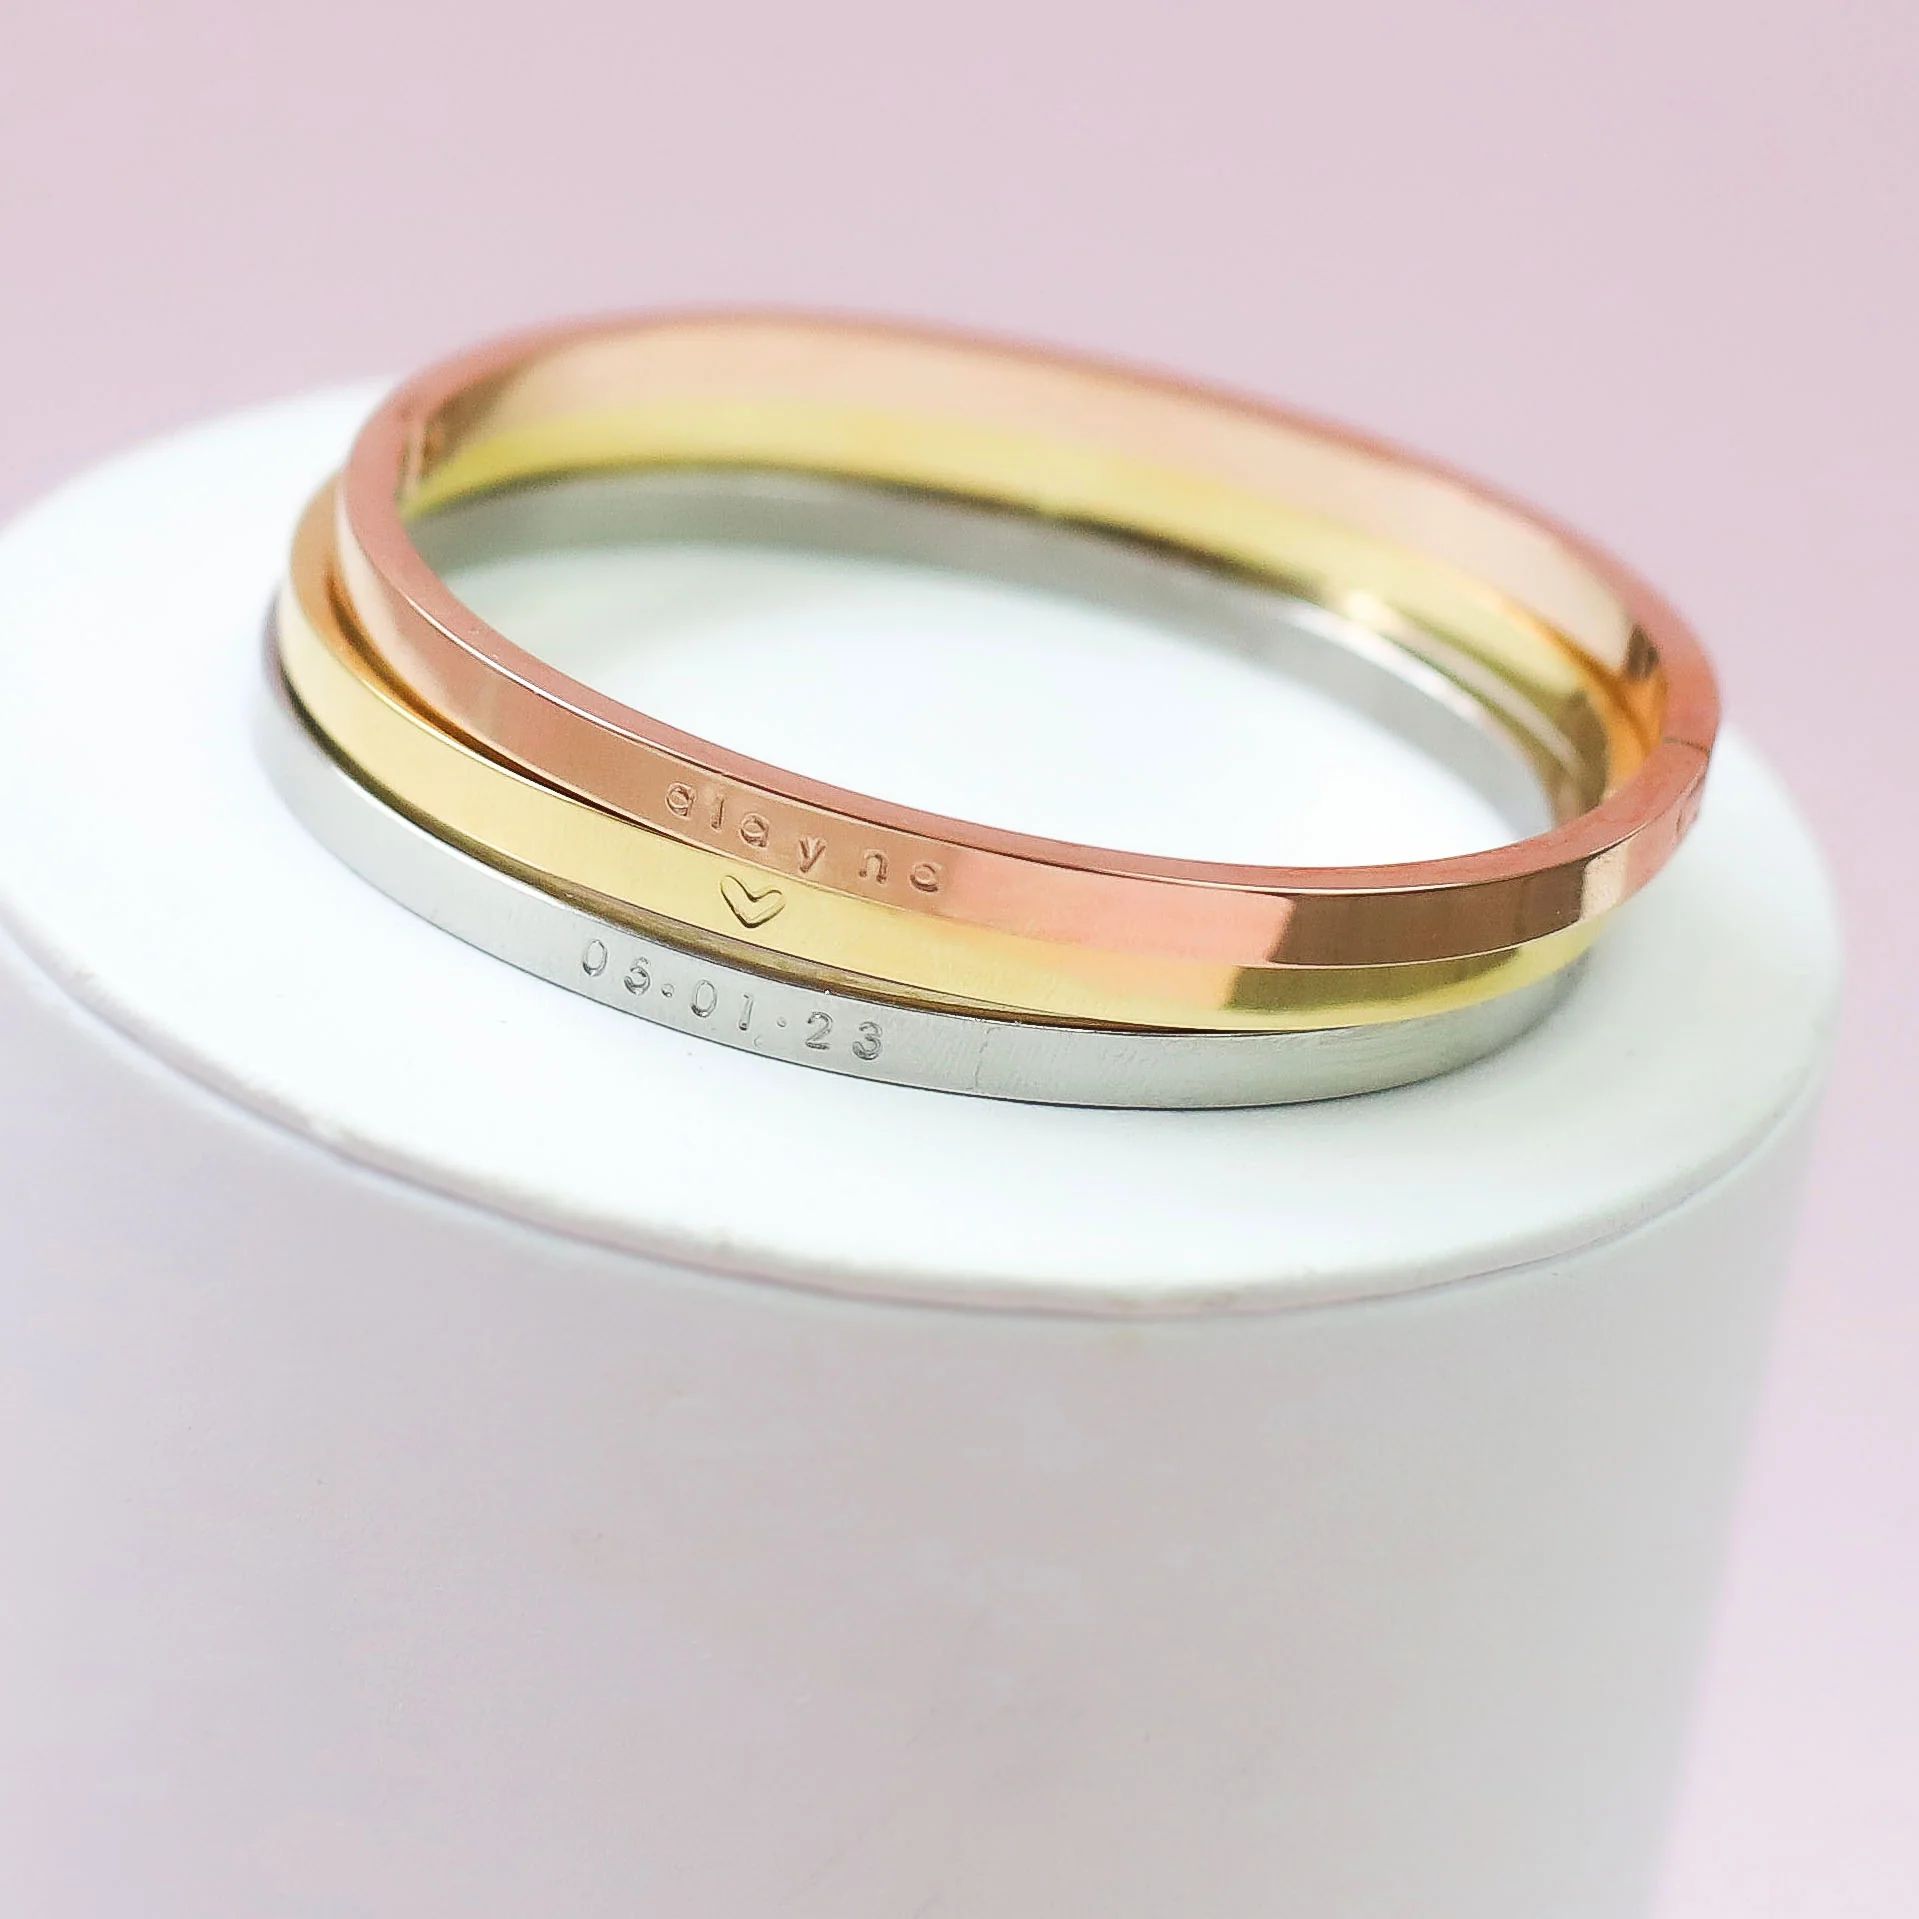 Meet Me in the Middle Bangle Set | Taudrey